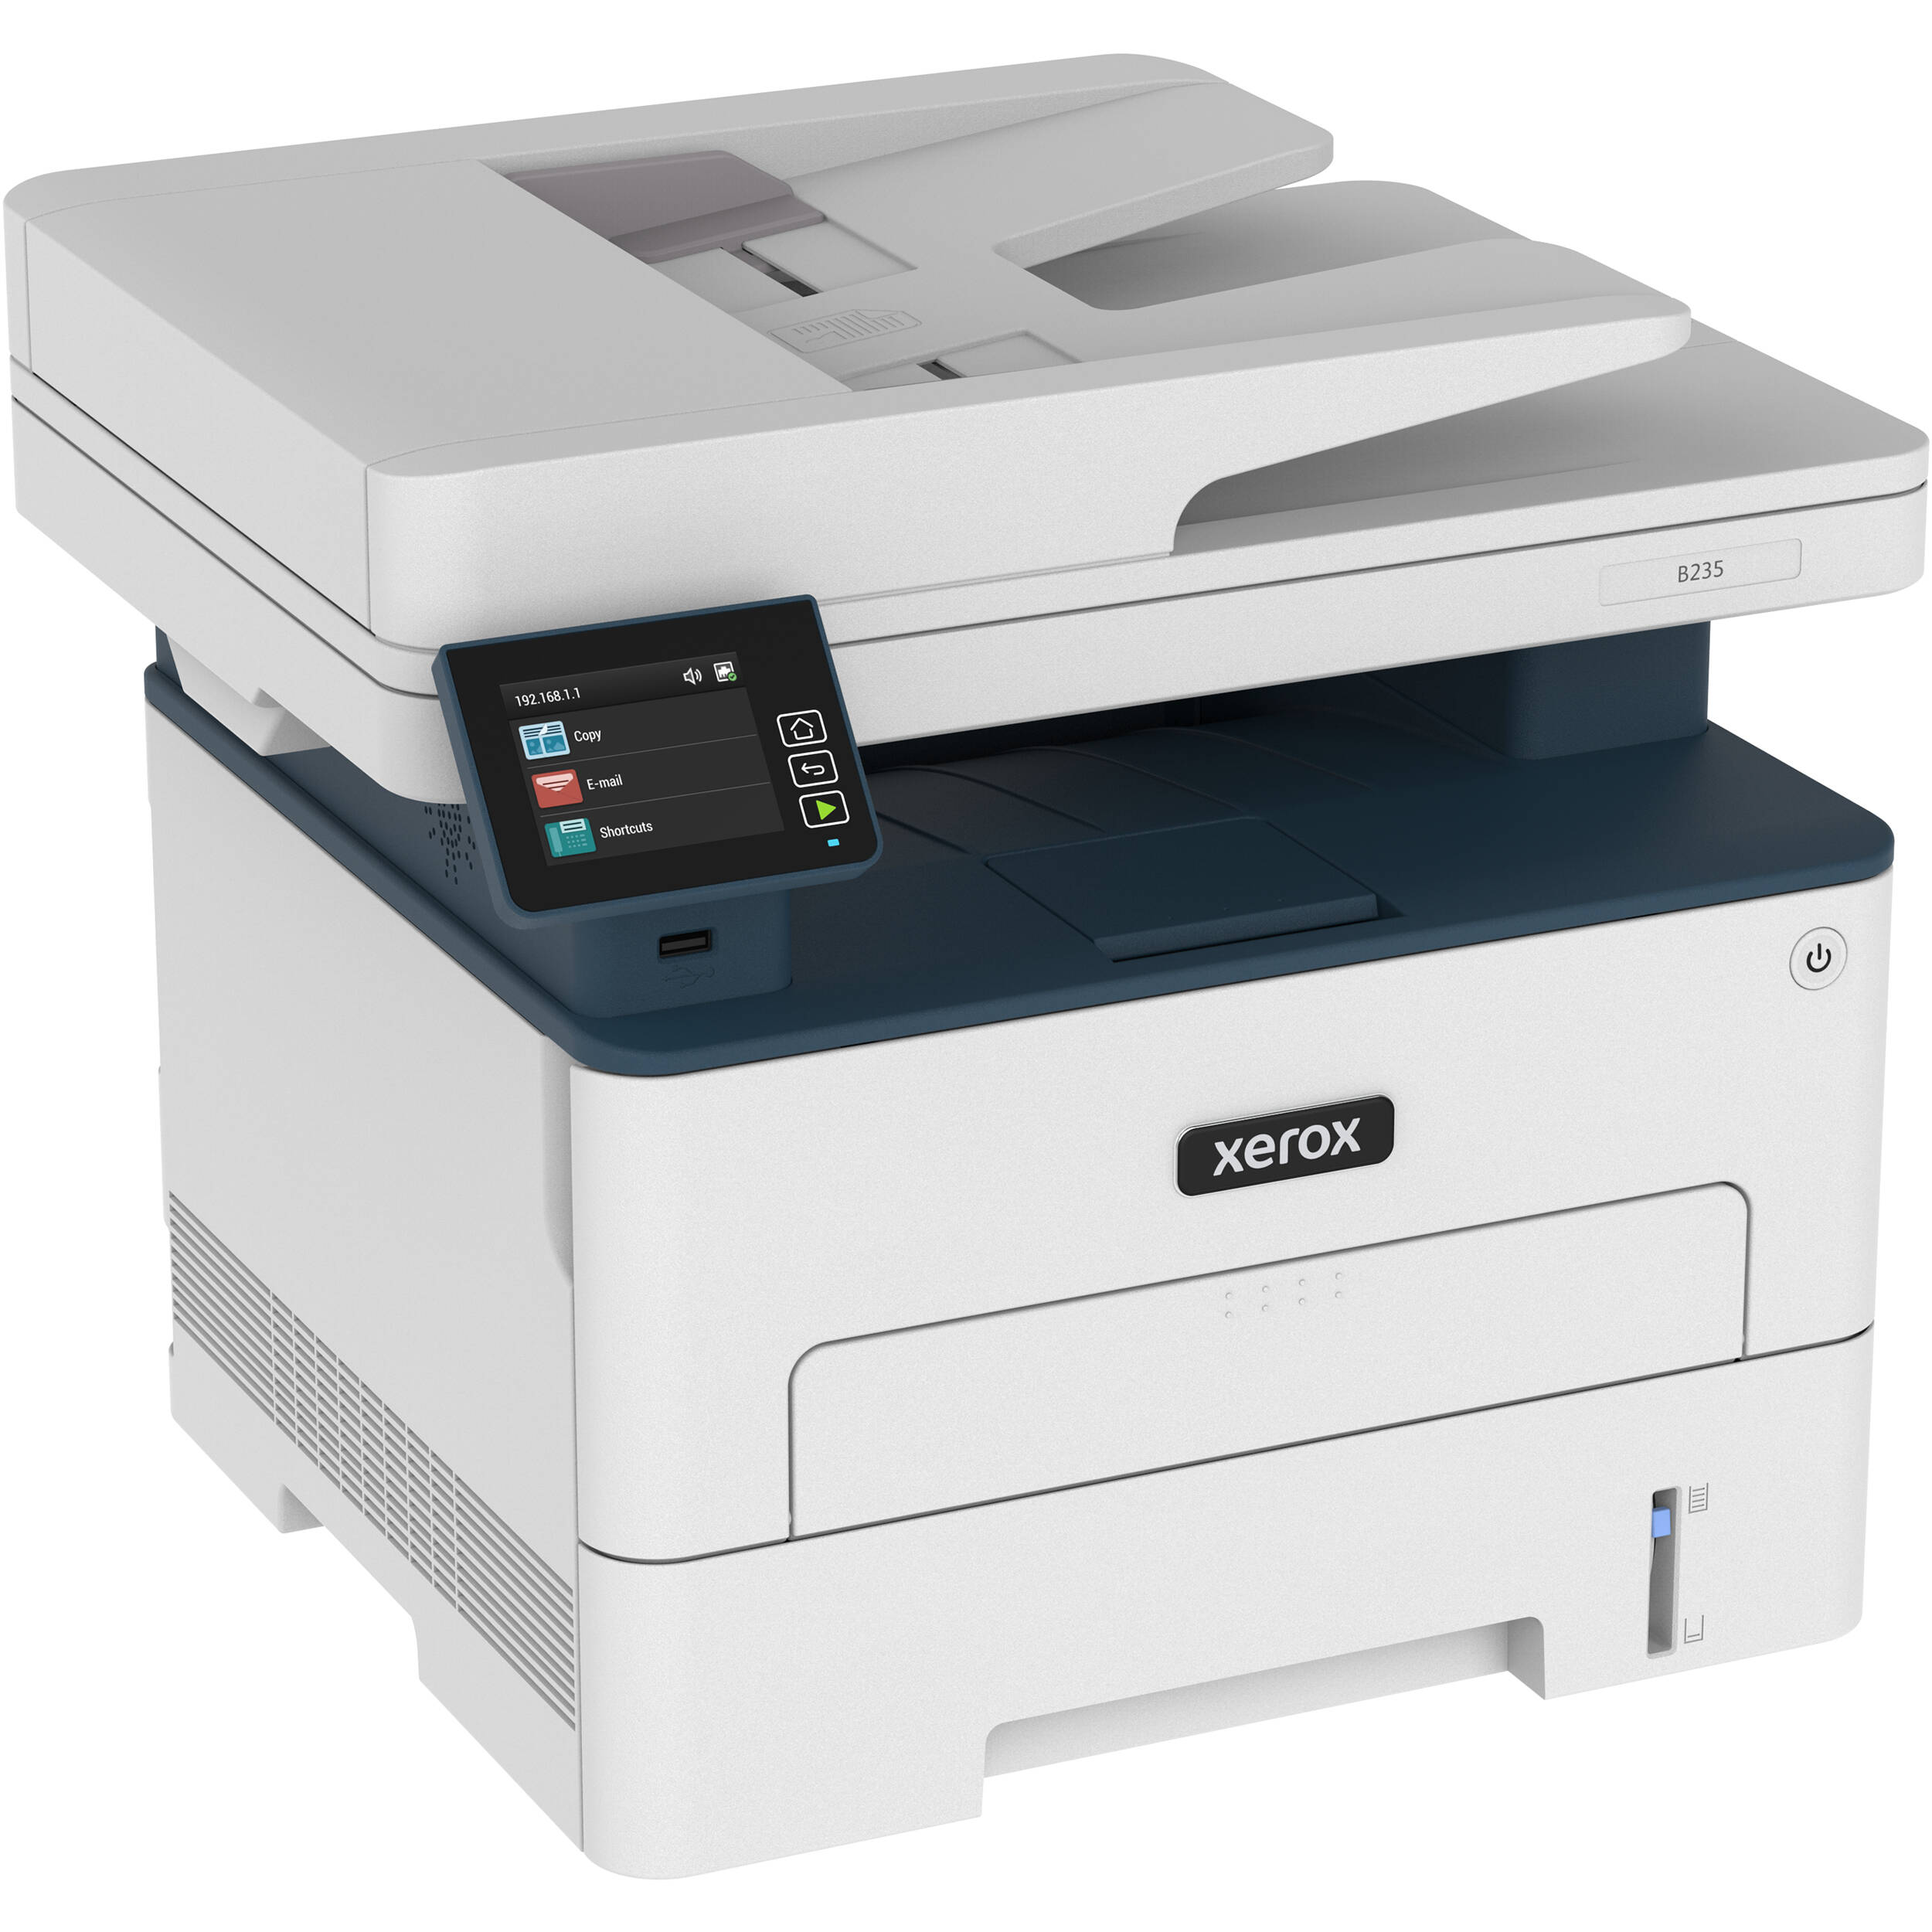 Enjoy Powerful, Space Saving Performance With The Xerox B235 Multifunction Printer, Print/Copy/Scan/Fax For Sale By Absolute Toner In Canada - Easy To Use Color Printer